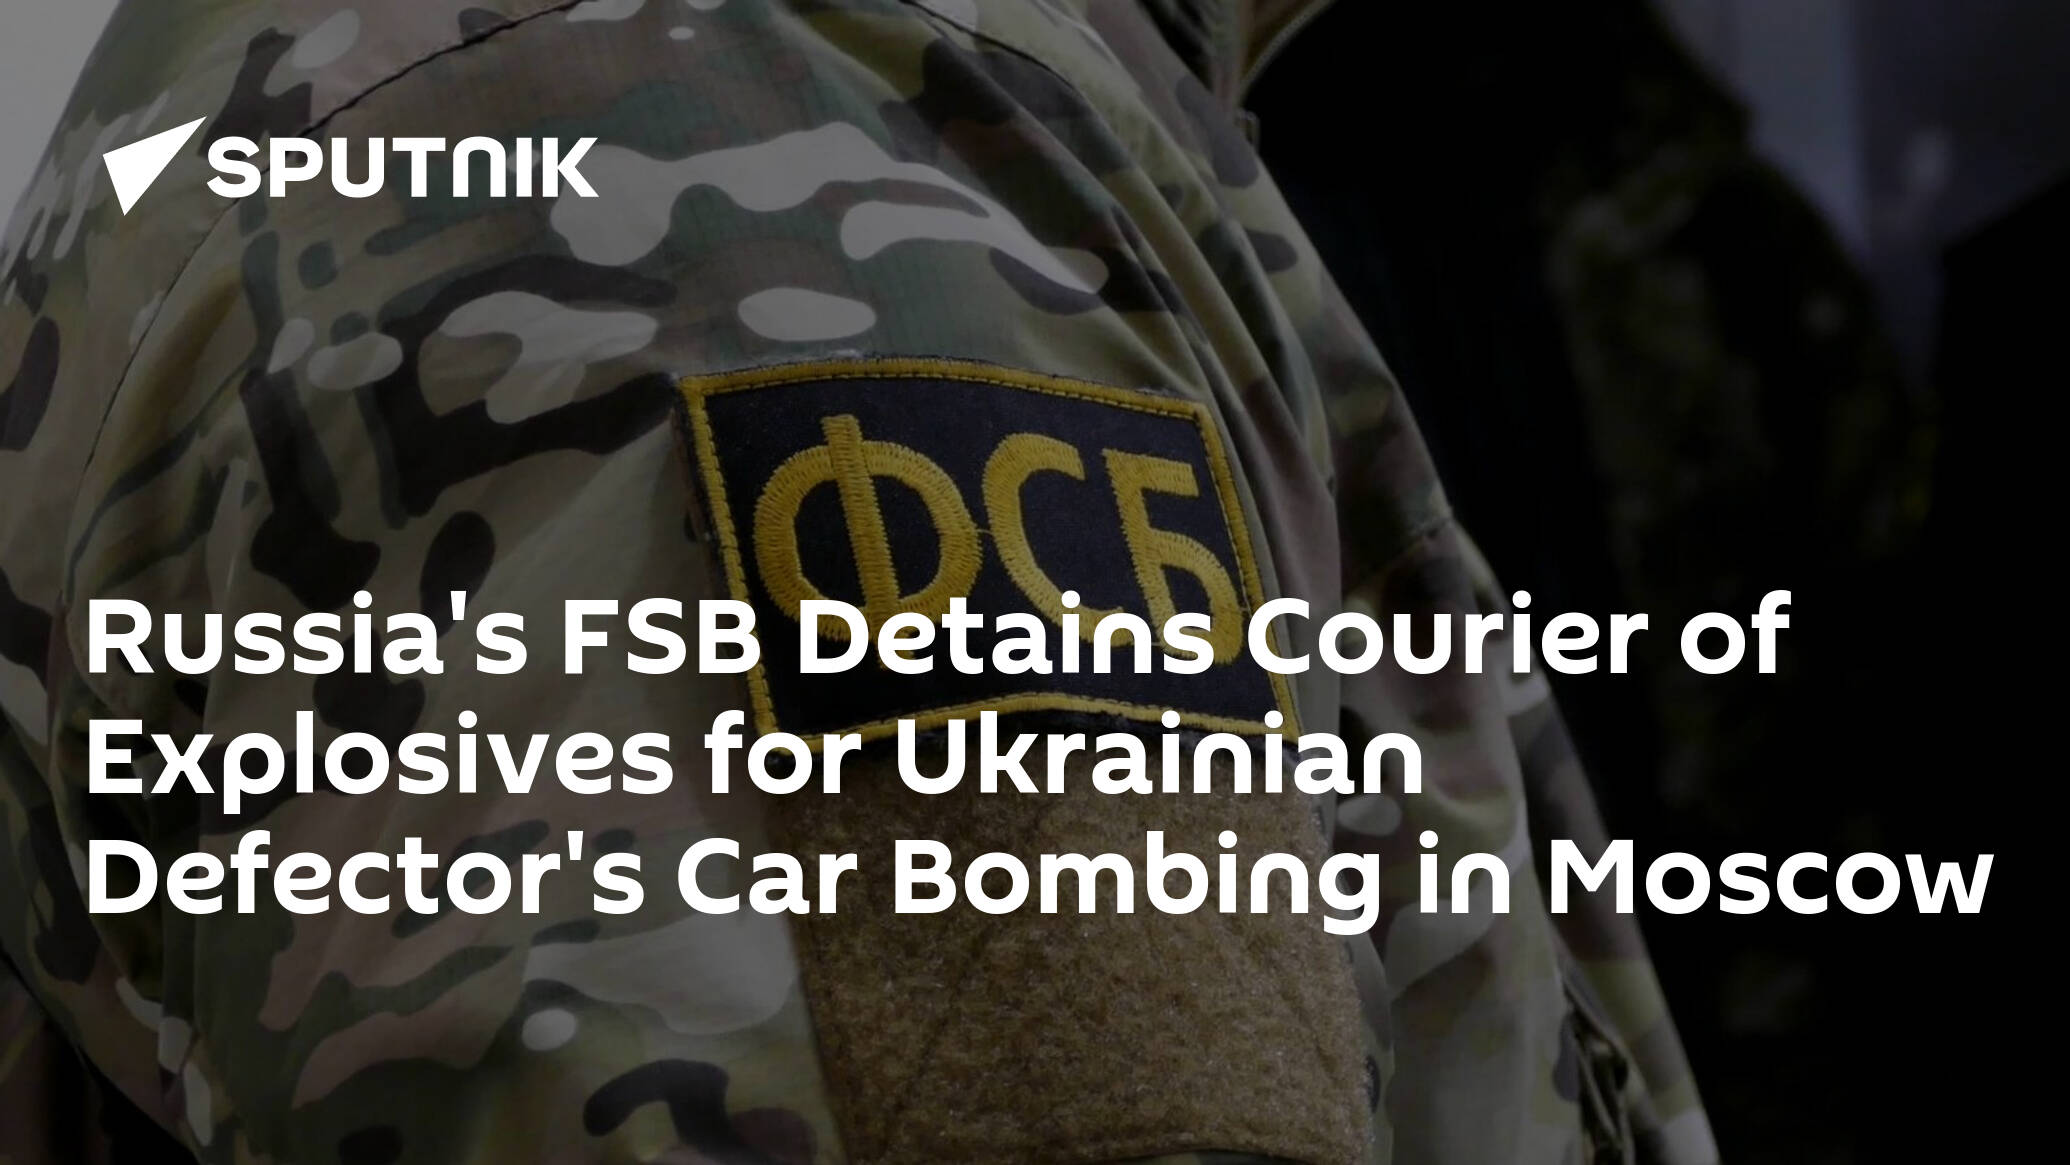 Russia's FSB Detains Courier of Explosives for Ukrainian Defector's Car